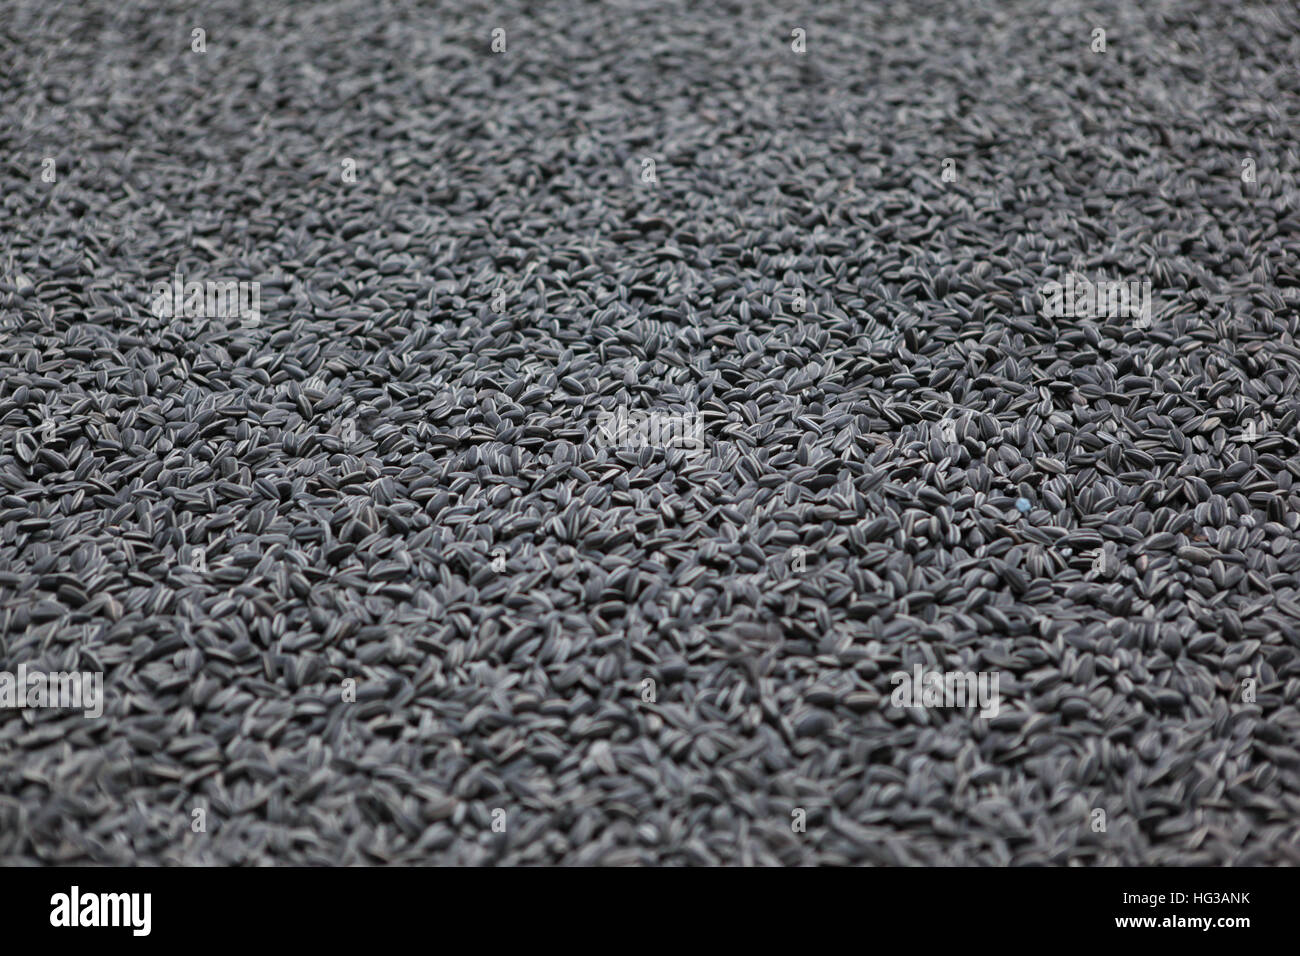 The Al Weiwei exhibiton of sunflower seeds, in the Turbine Hall of the Tate Modern. London. Stock Photo